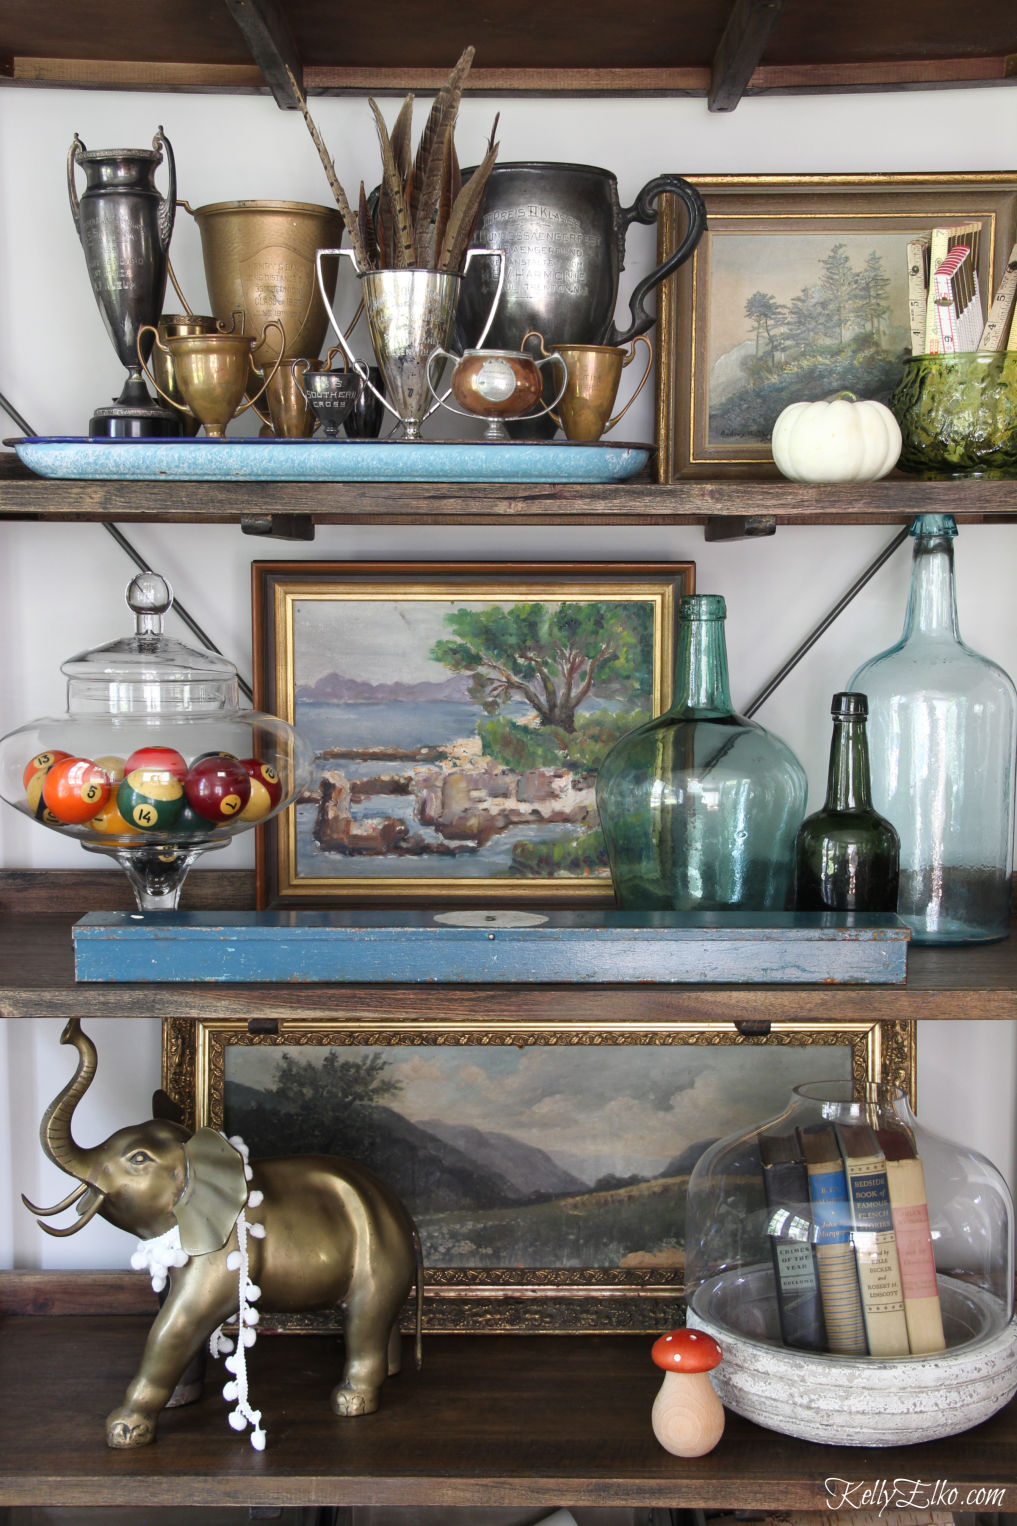 Vintage Lovers Fall Home Tour - love this eclectic assortment of vintage finds creatively displayed kellyelko.com #fall #falldecor #falldecorating #shelfstyling #vintagedecor #eclecticdecor #collections #homedecor